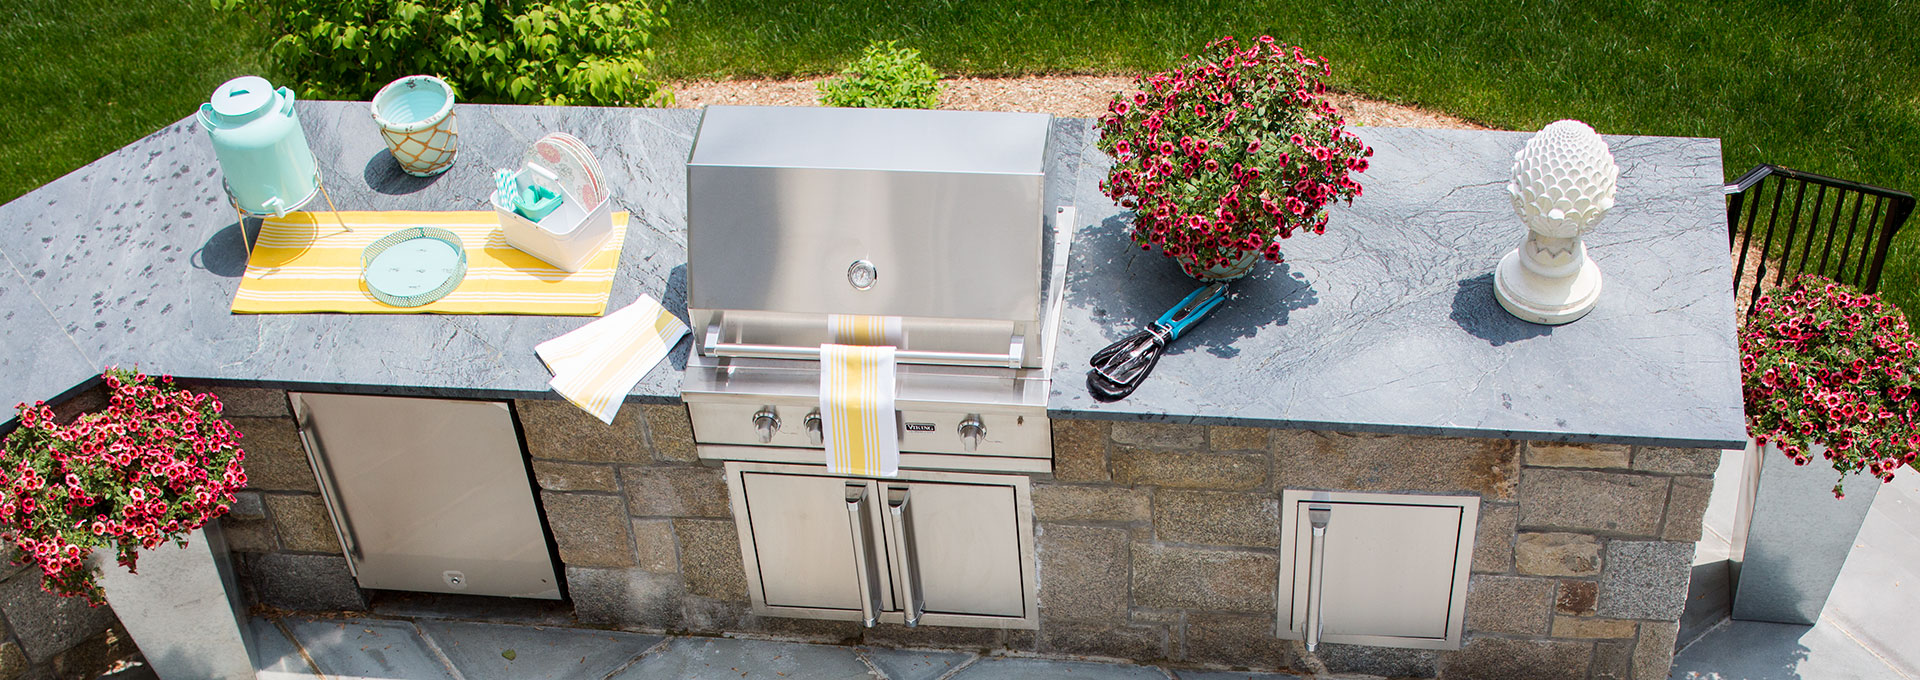 outdoor stone grilling station - Outdoor Surface Material at Connecticut Stone